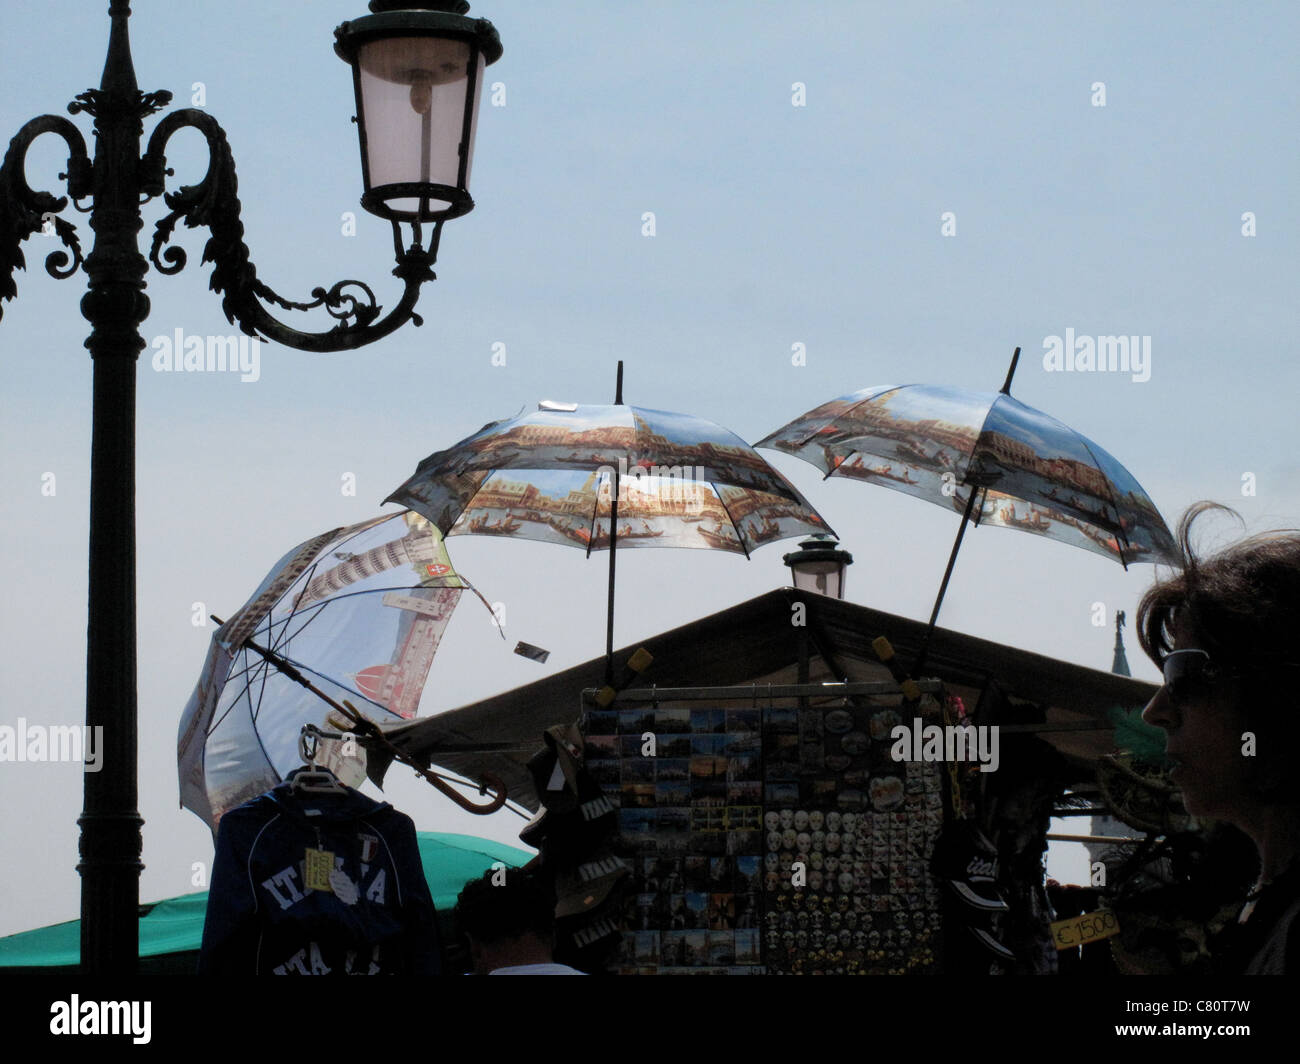 Old fashioned lamp post with a market stall selling umbrellas Venice Stock Photo